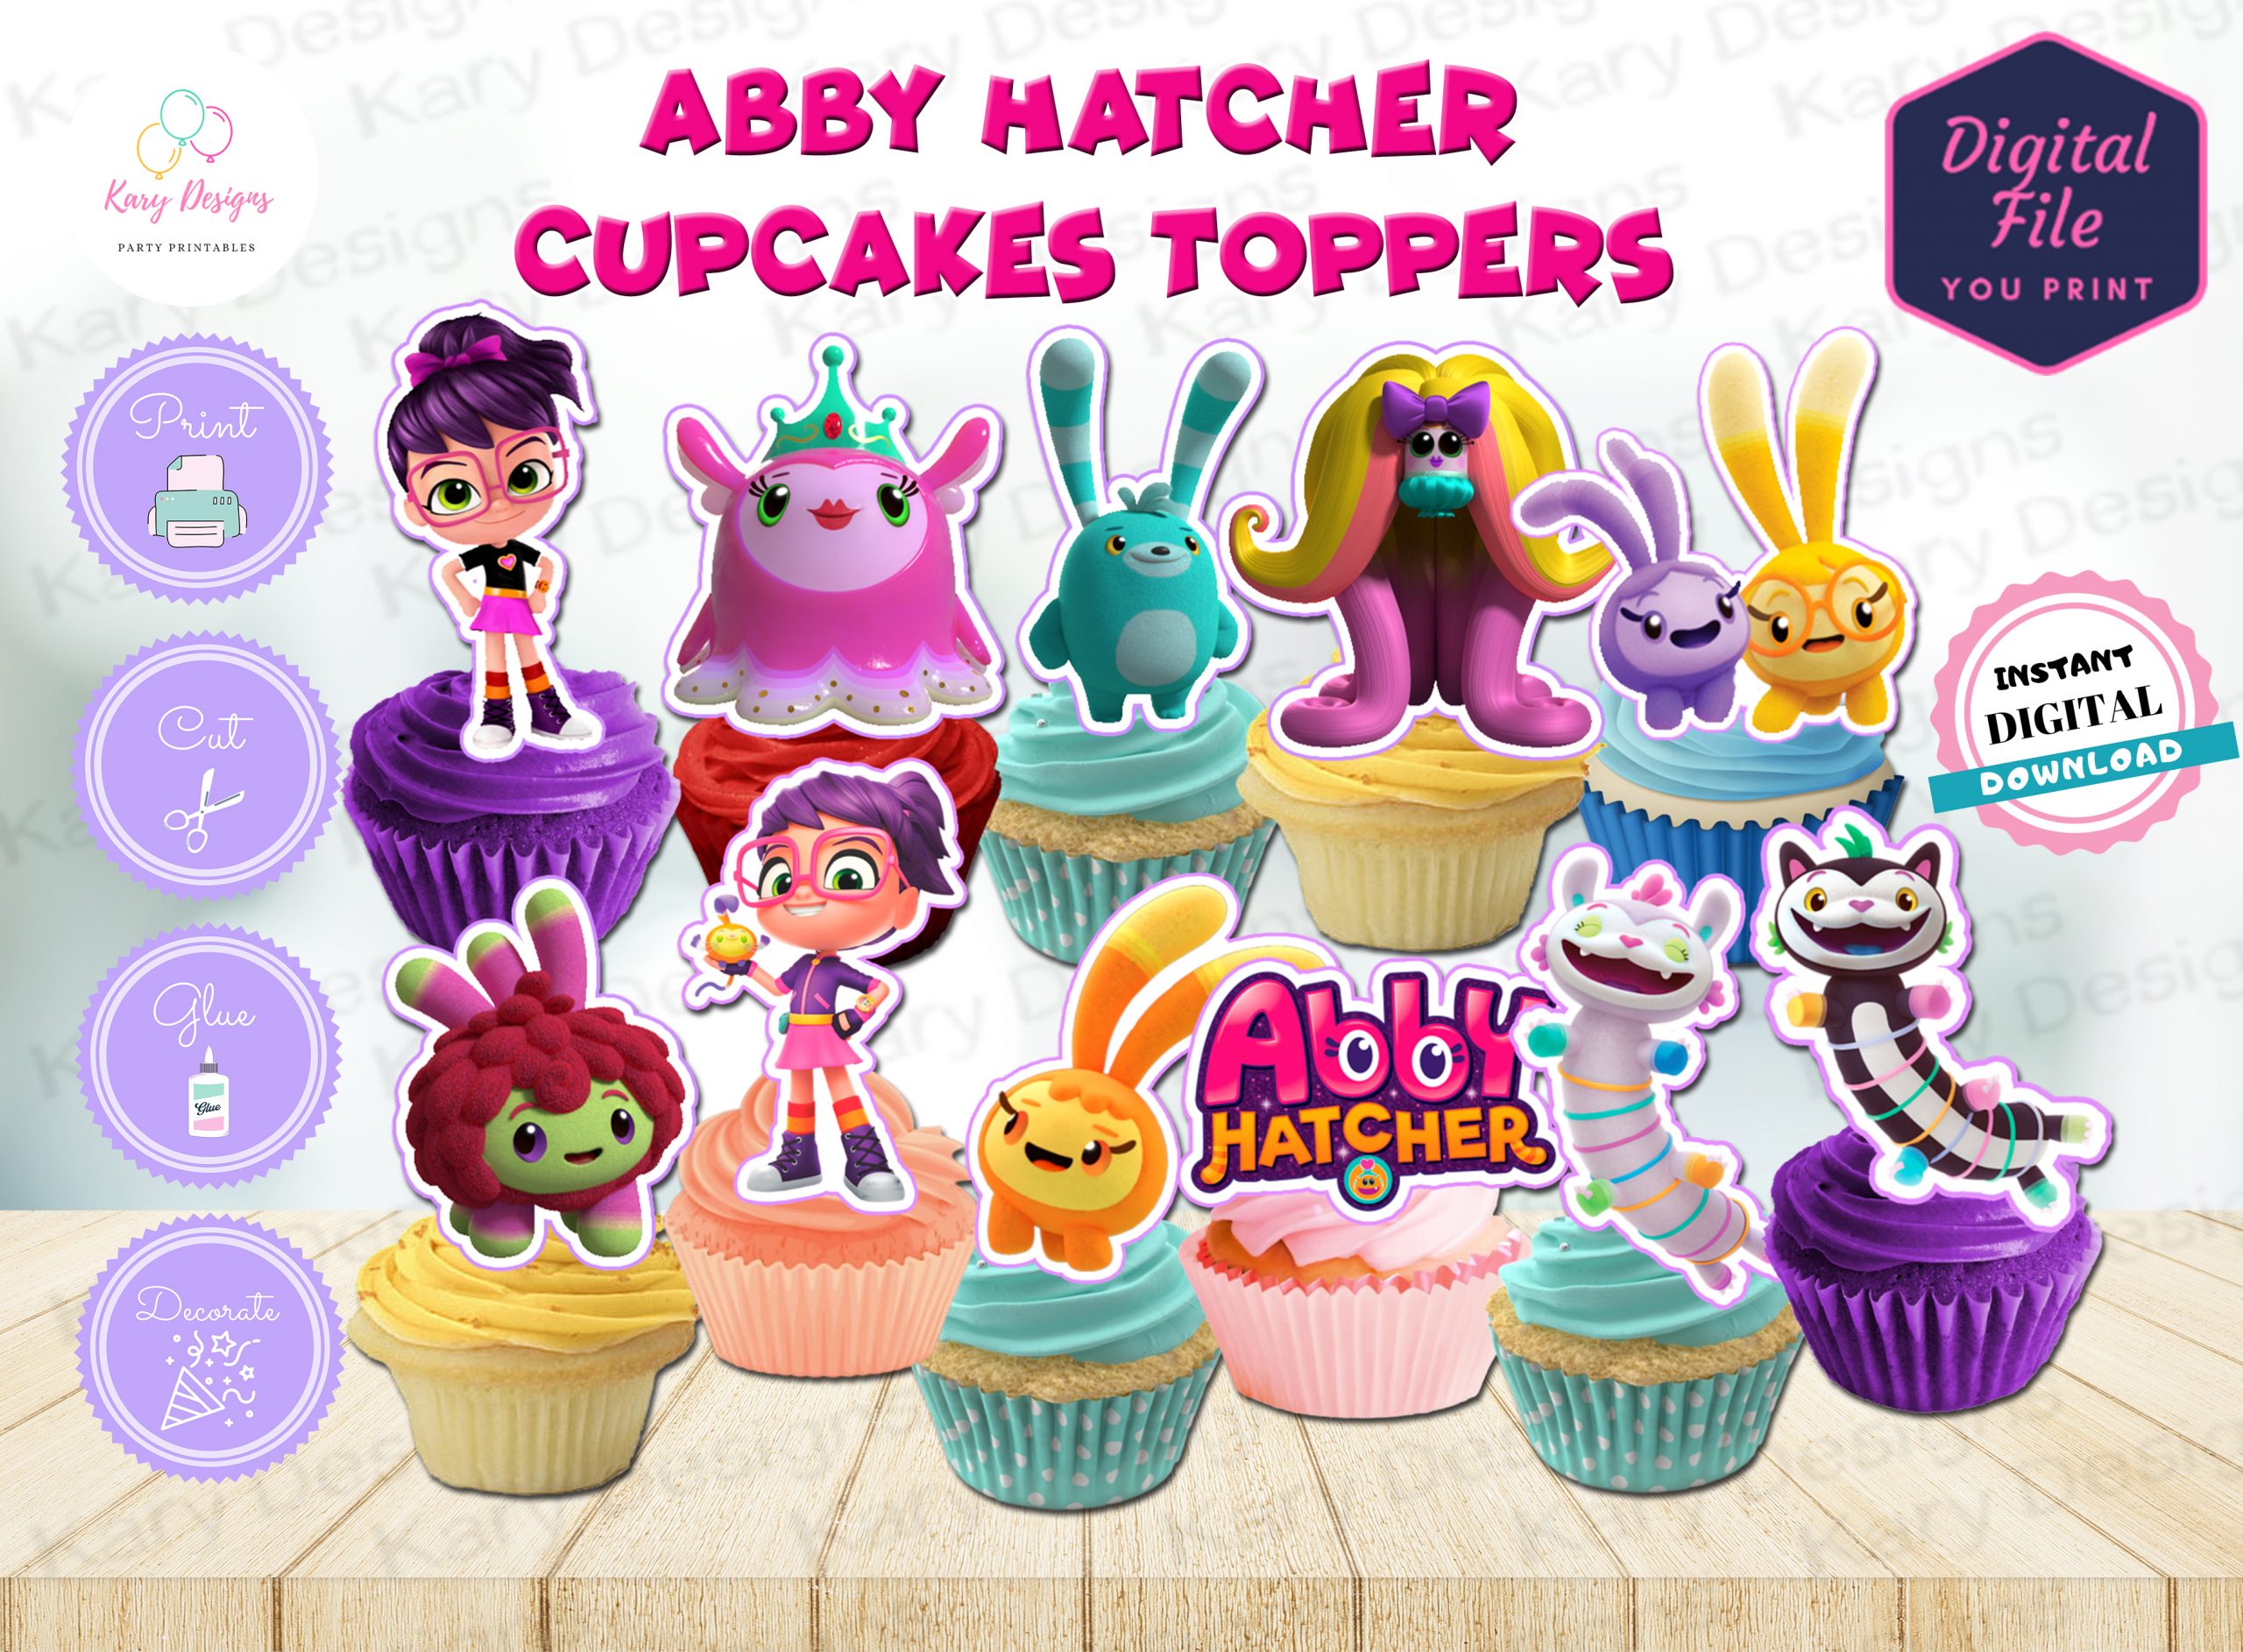 ABBY HATCHER CAKE TOPPER, PERSONALIZED,CUPCAKE TOPPER, BIRTHDAY PARTY